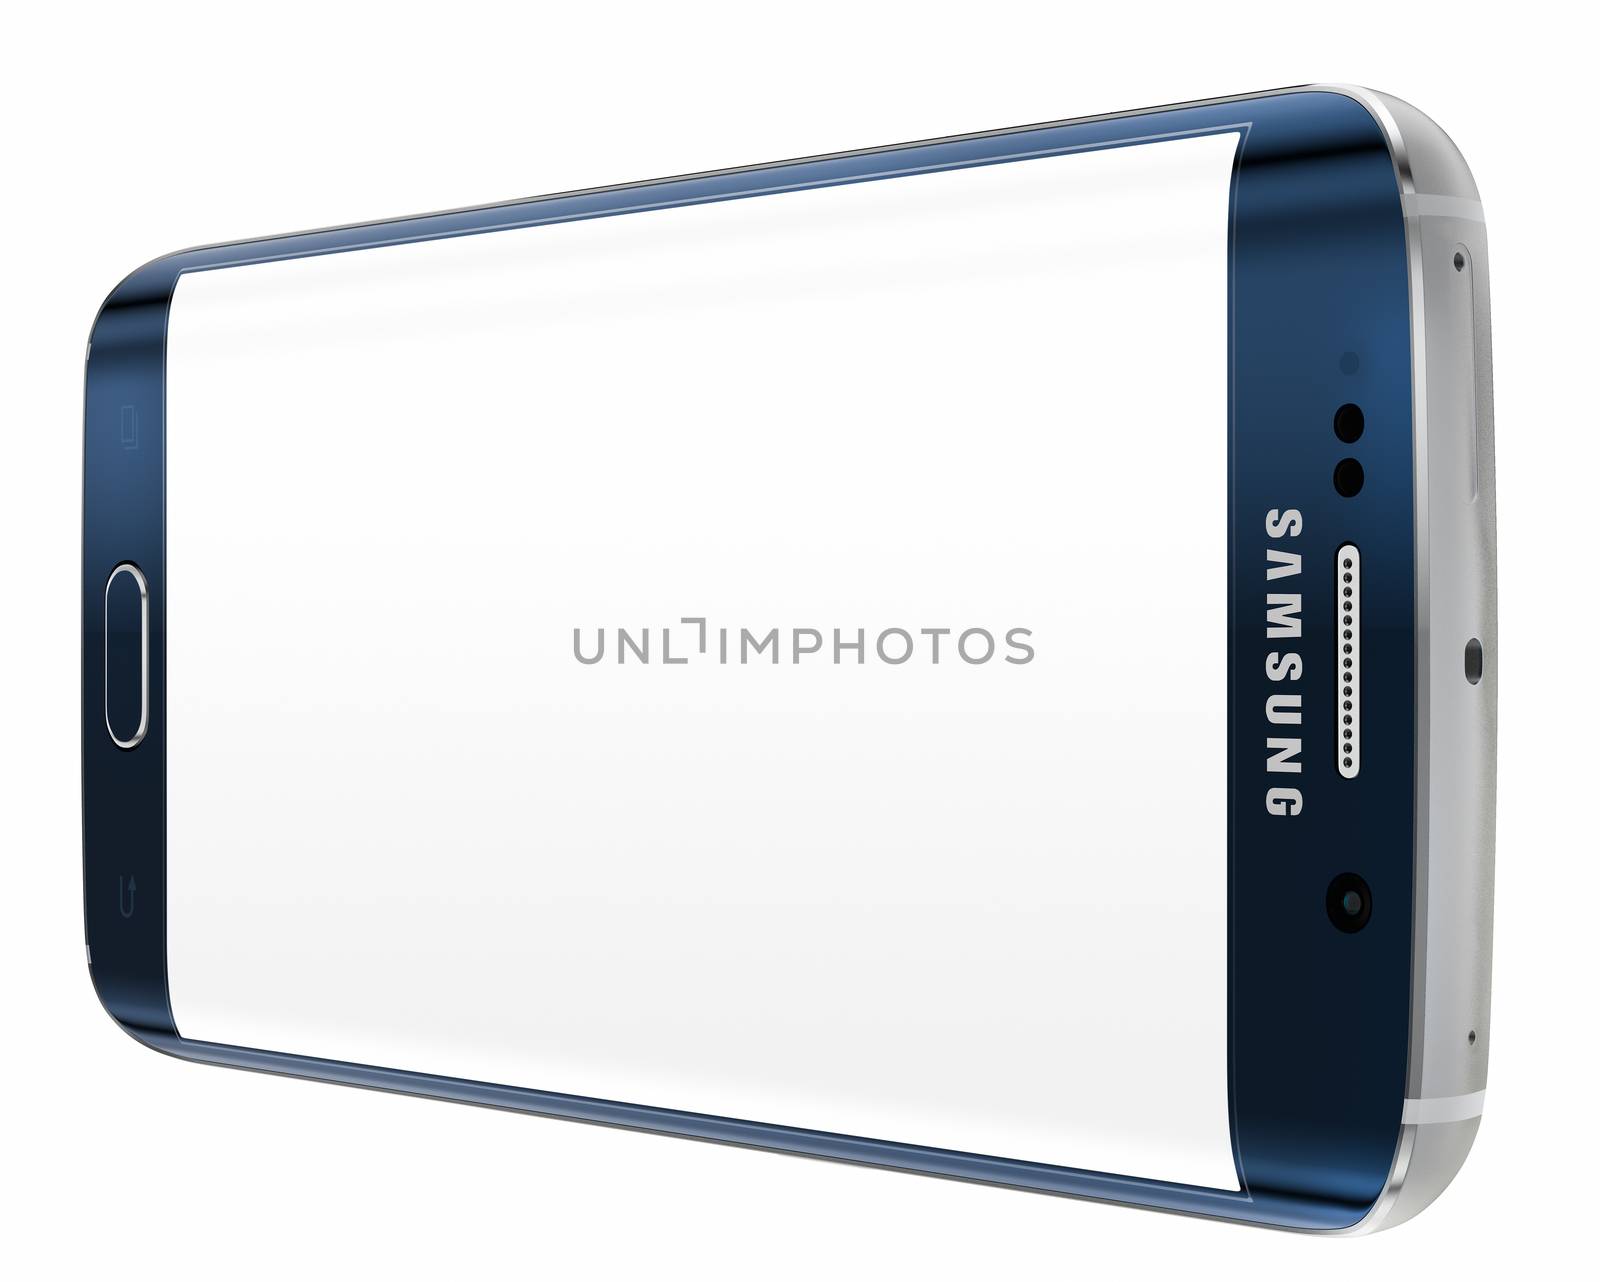 Galati, Romania - March 23, 2015: Samsung Galaxy S6 Edge is the first device with dual-curved glass display. The Samsung Galaxy S6 and Galaxy S6 Edge was launched at a press event in Barcelona on March 1 2015. Galaxy S6 has Quad HD Super AMOLED, 2560x1440, 577 PPI, Lightning-fast 64 bit and Octa-core processor.